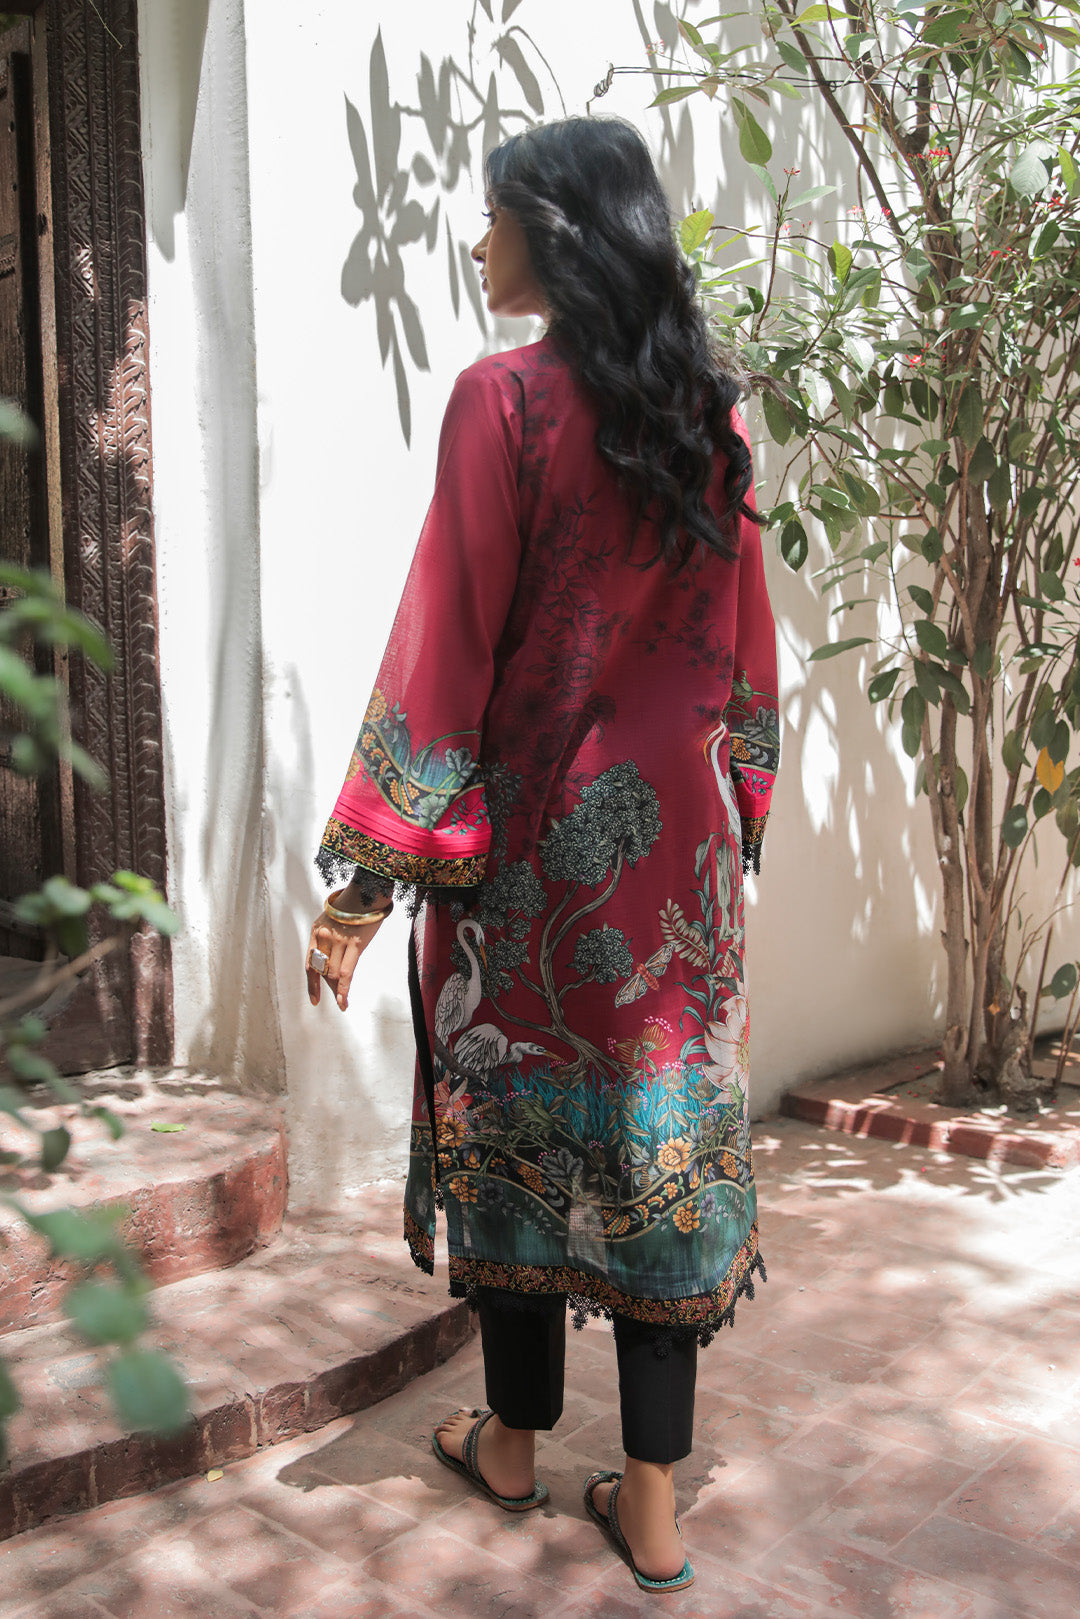 1 Piece - Embroidered Digital Printed Textured Lawn Shirt P0606 (SO)